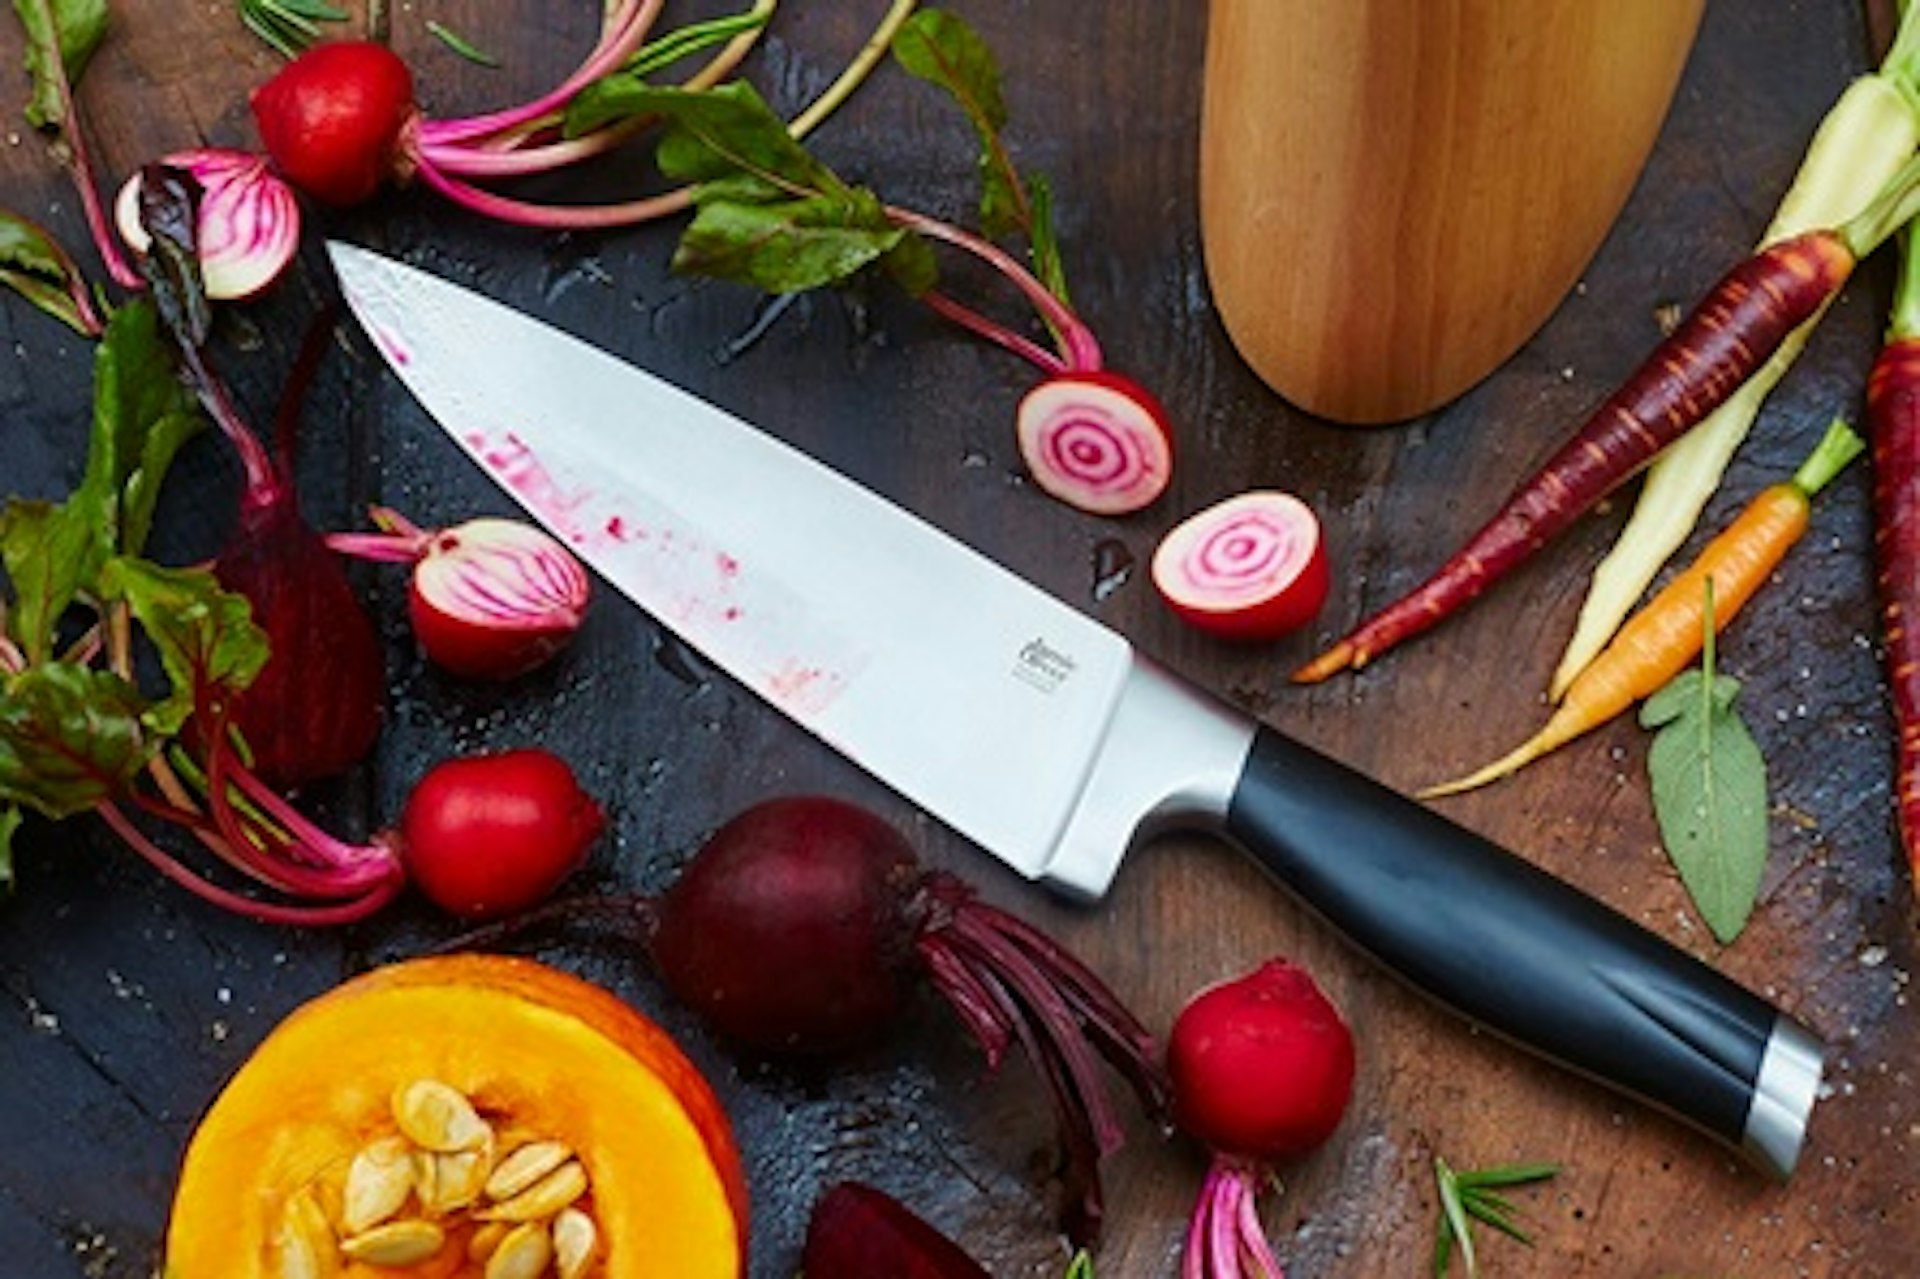 Ultimate Knife Skills Masterclass at The Jamie Oliver Cookery School 1